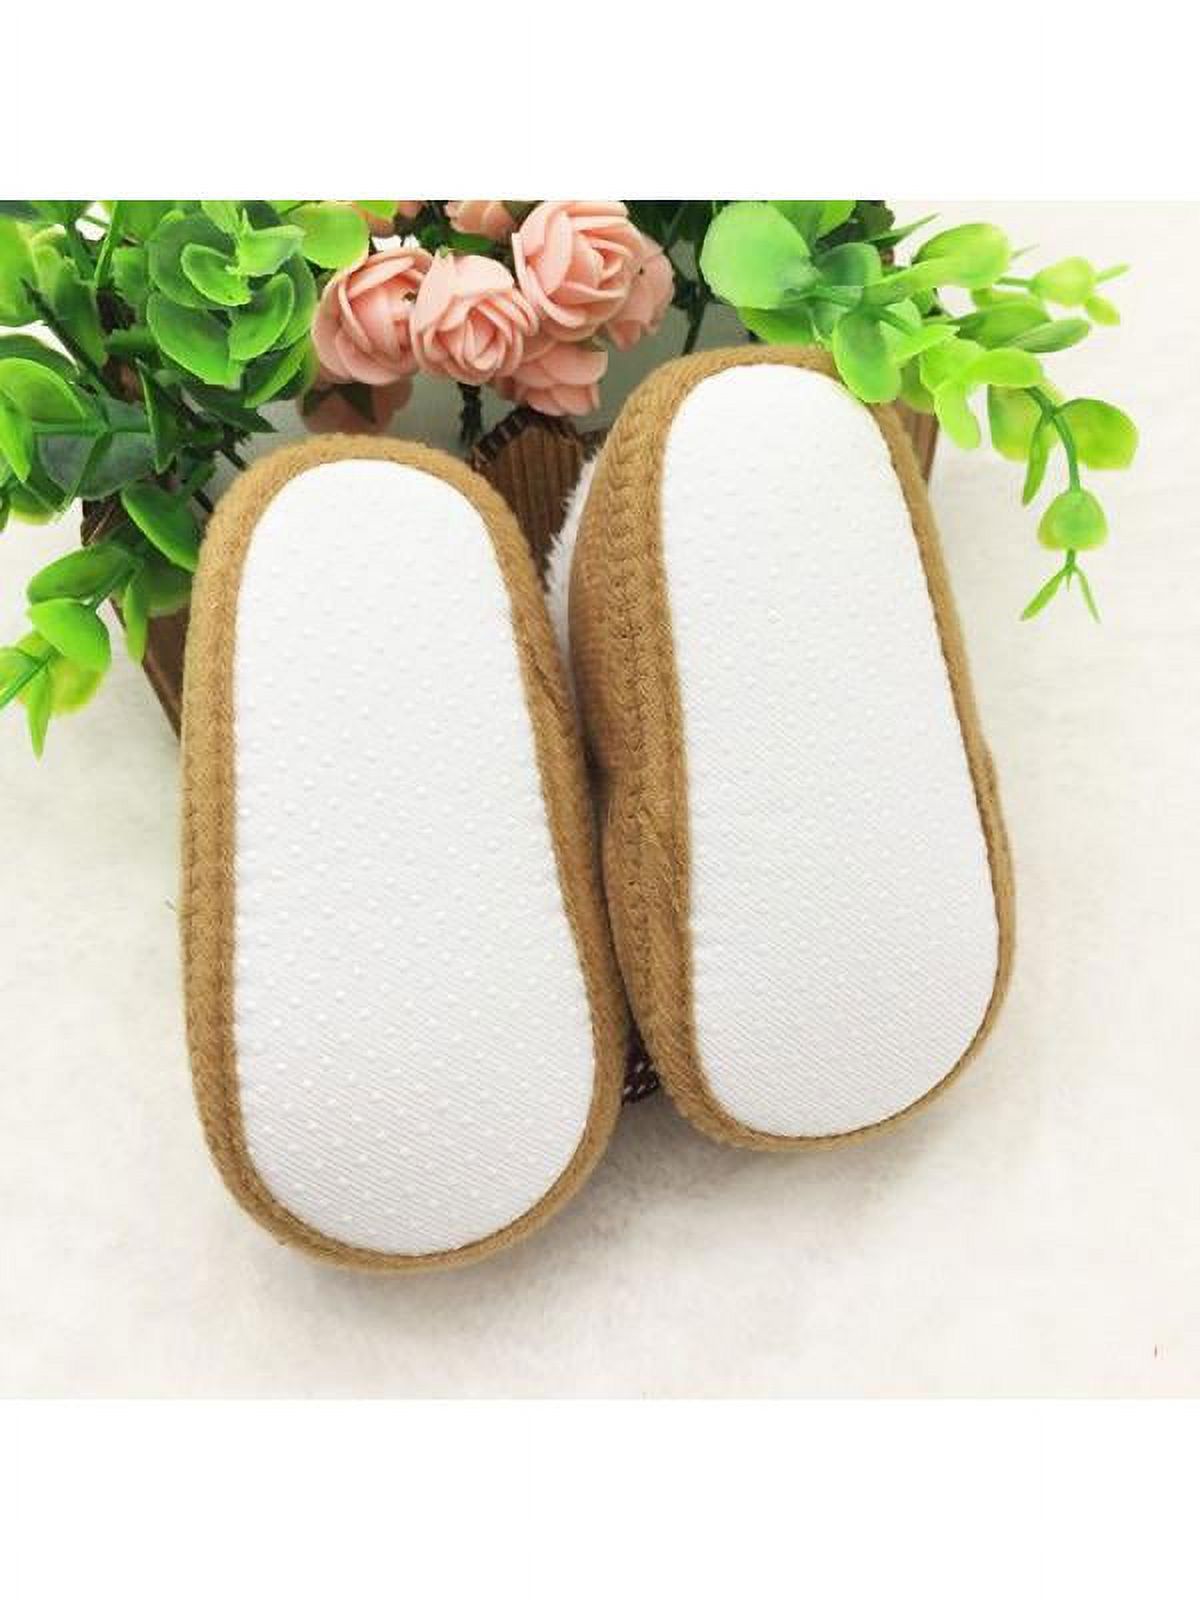 Taykoo Winter Warm Baby Boys Girls Slippers Non Slip Snow Boots Crib Casual Shoes 0-18M - image 3 of 3